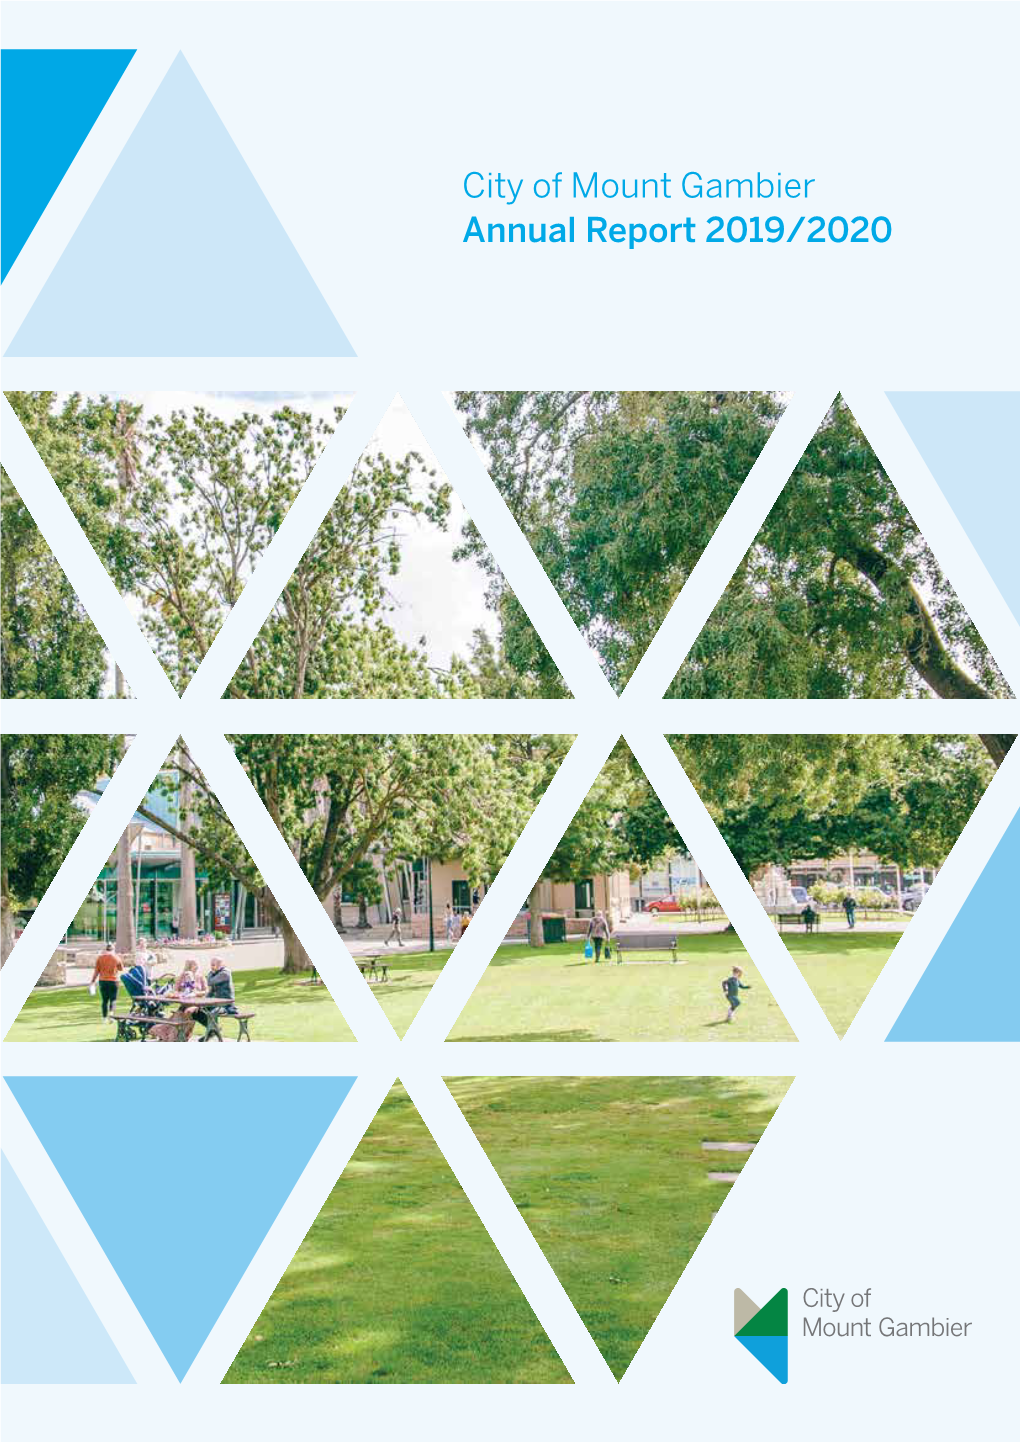 City of Mount Gambier Annual Report 2019/2020